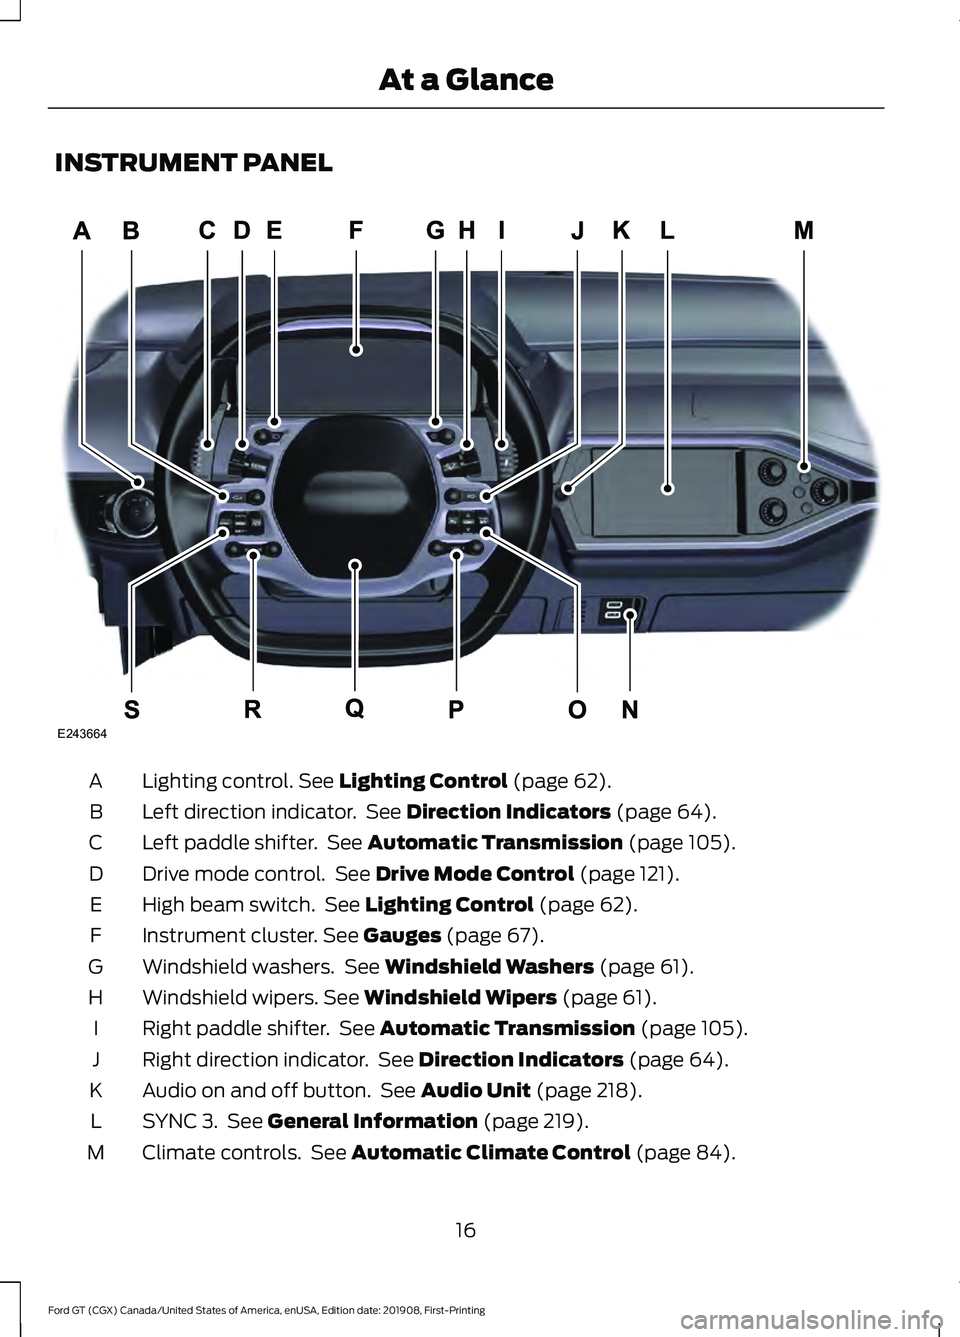 FORD GT 2020  Owners Manual INSTRUMENT PANEL
Lighting control. See Lighting Control (page 62).
A
Left direction indicator.  See 
Direction Indicators (page 64).
B
Left paddle shifter.  See 
Automatic Transmission (page 105).
C
D